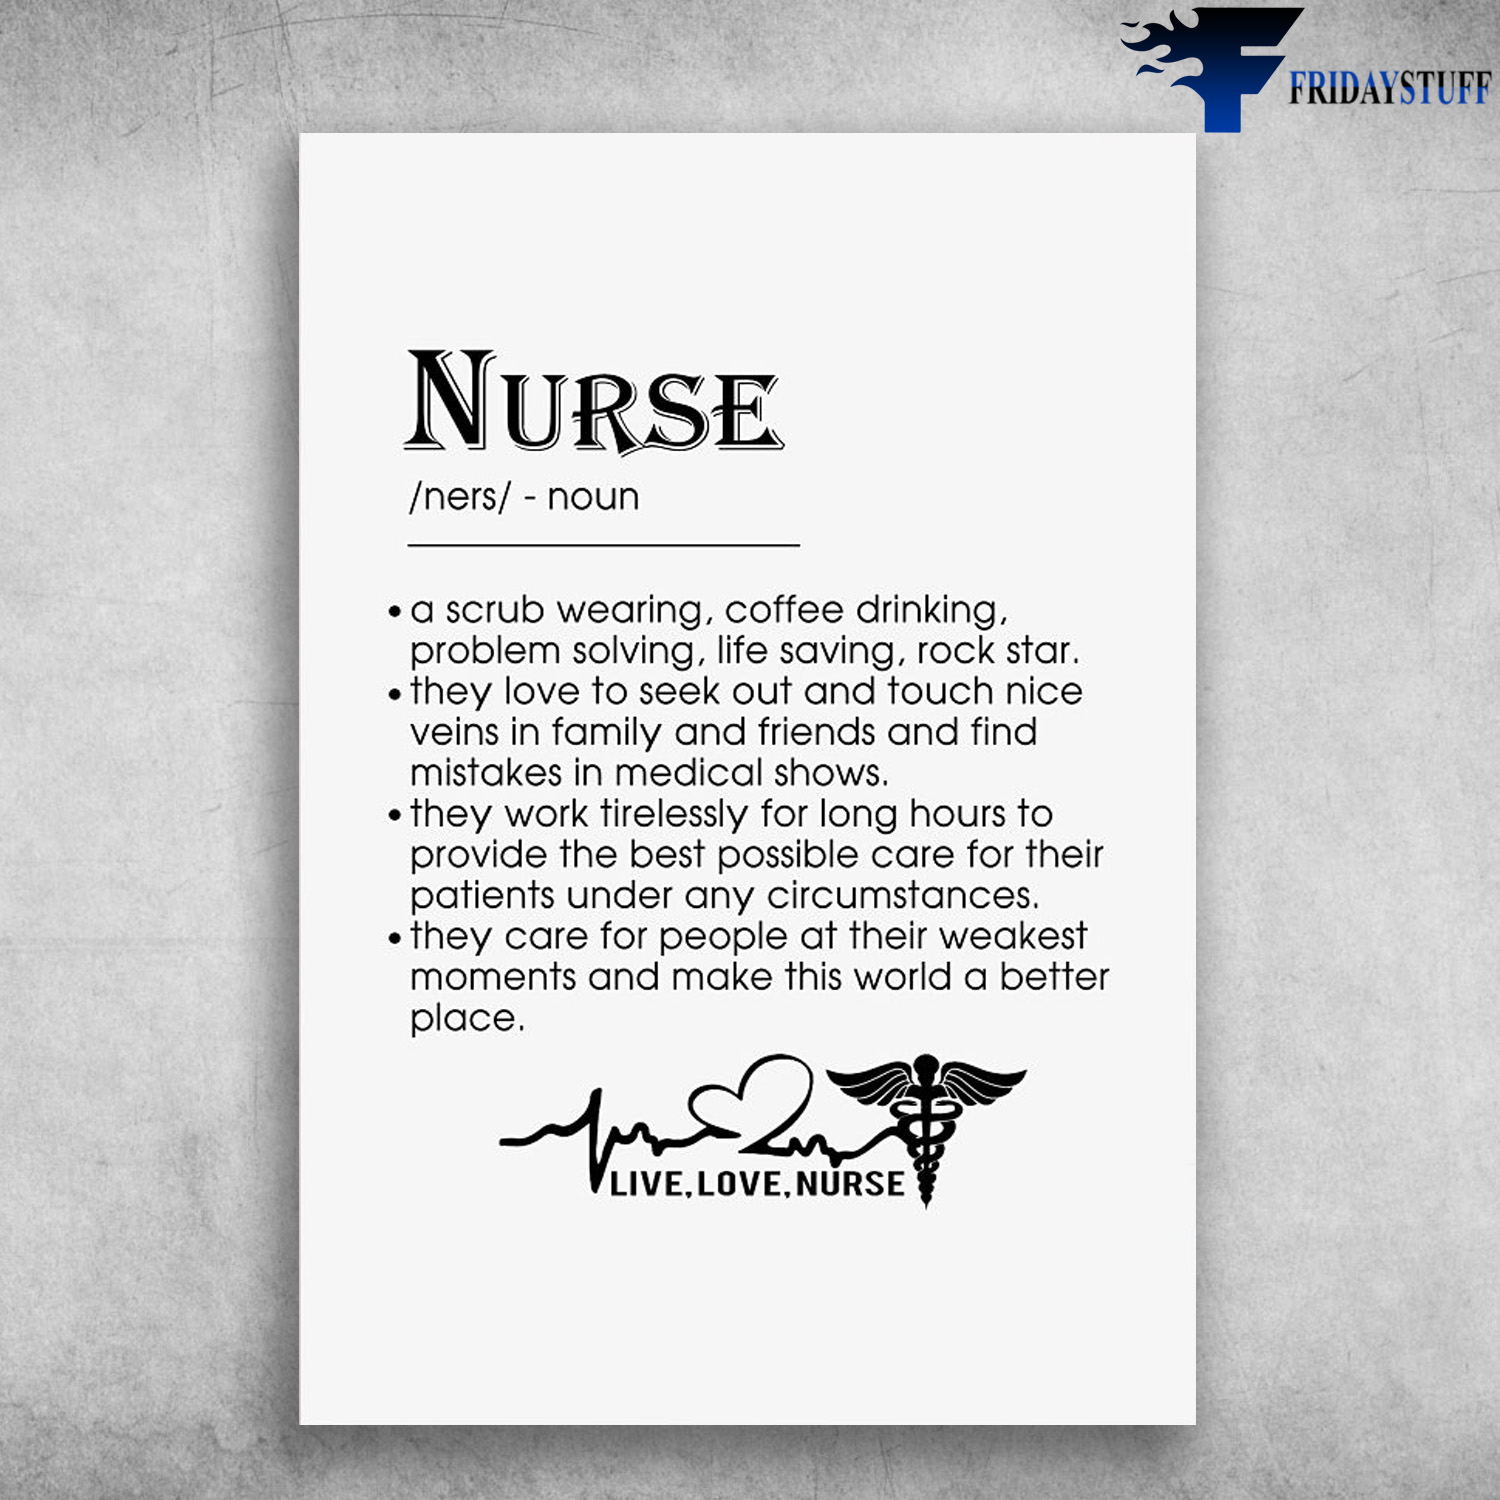 Nurse Definition - A Scrub Wearing, Coffee Drinking, Problem Solving, Life Saving, Rock Star, They Love To Seek Out, And Touch Nice Veins In Family And Friends, And Find Mistakes In Medical Shows, Live Love Nurse